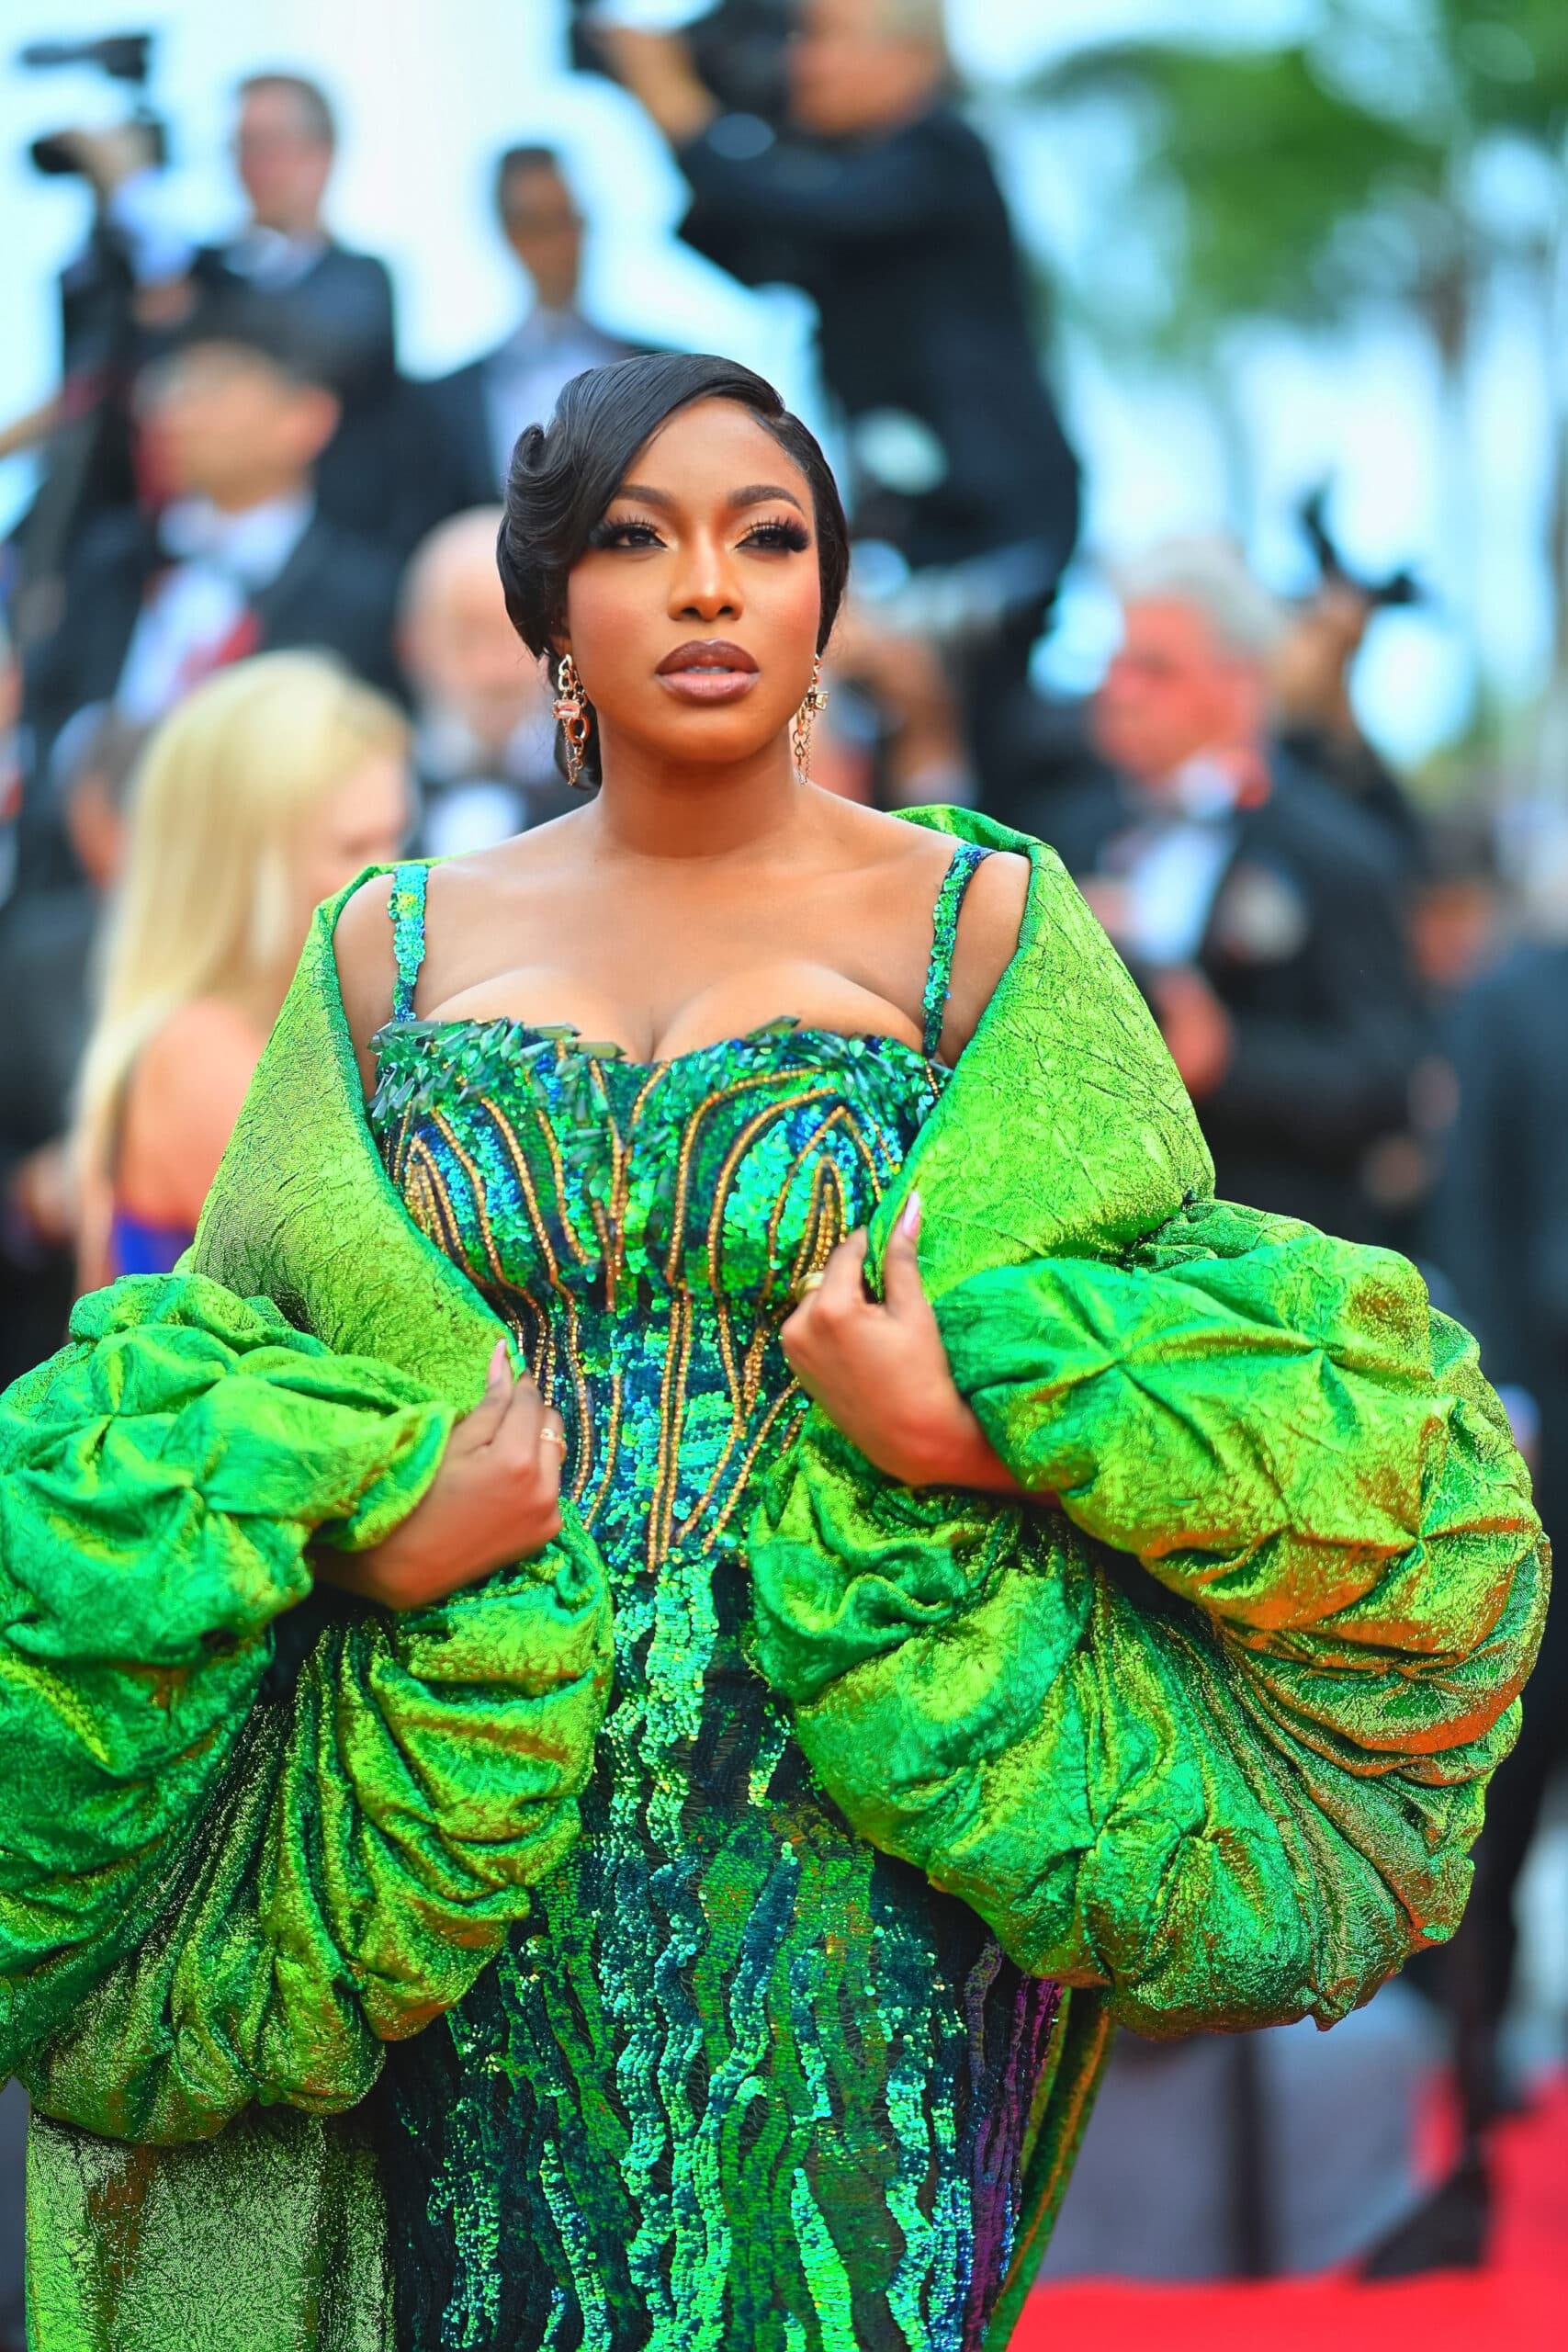 Chika Ike takes Cannes Film Festival by storm, ranks on best dressed lists